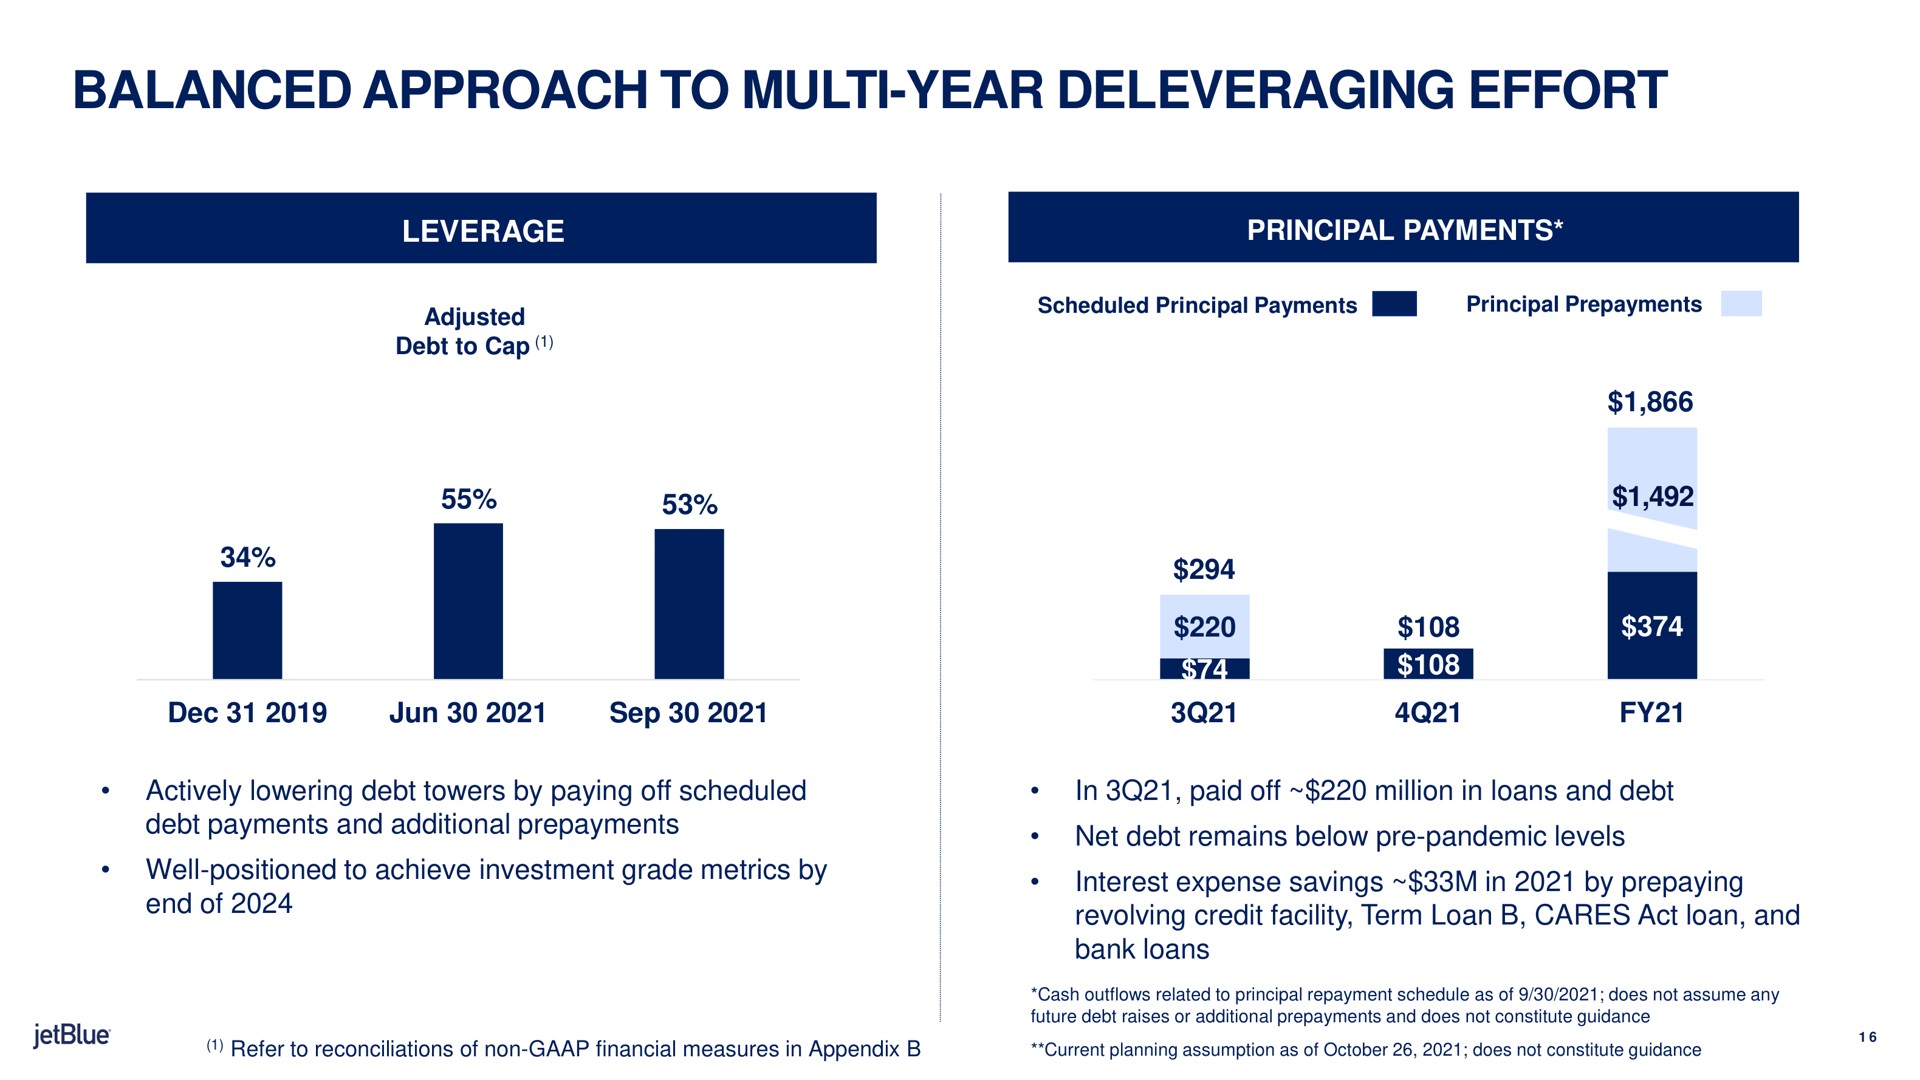 balanced approach to year effort a debt payments and additional prepayments net debt remains below pandemic levels | jetBlue